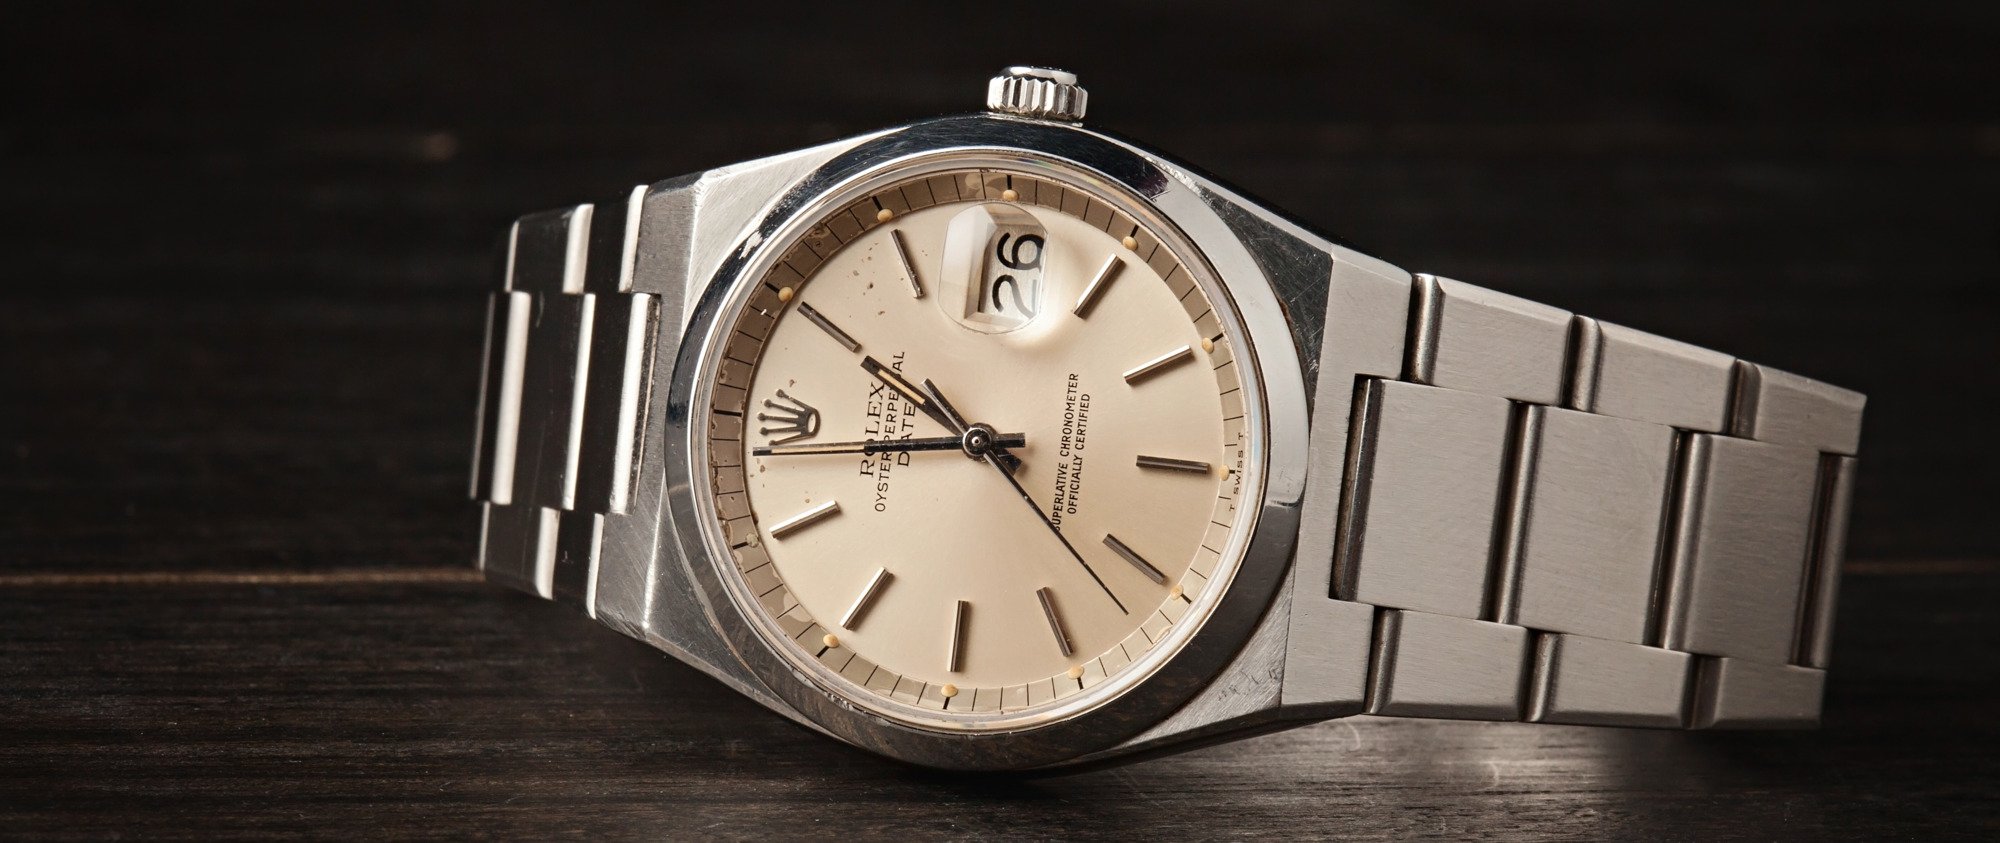 Vintage Rolex Date 1530 Ultimate Buying Guide | Bob's Watches